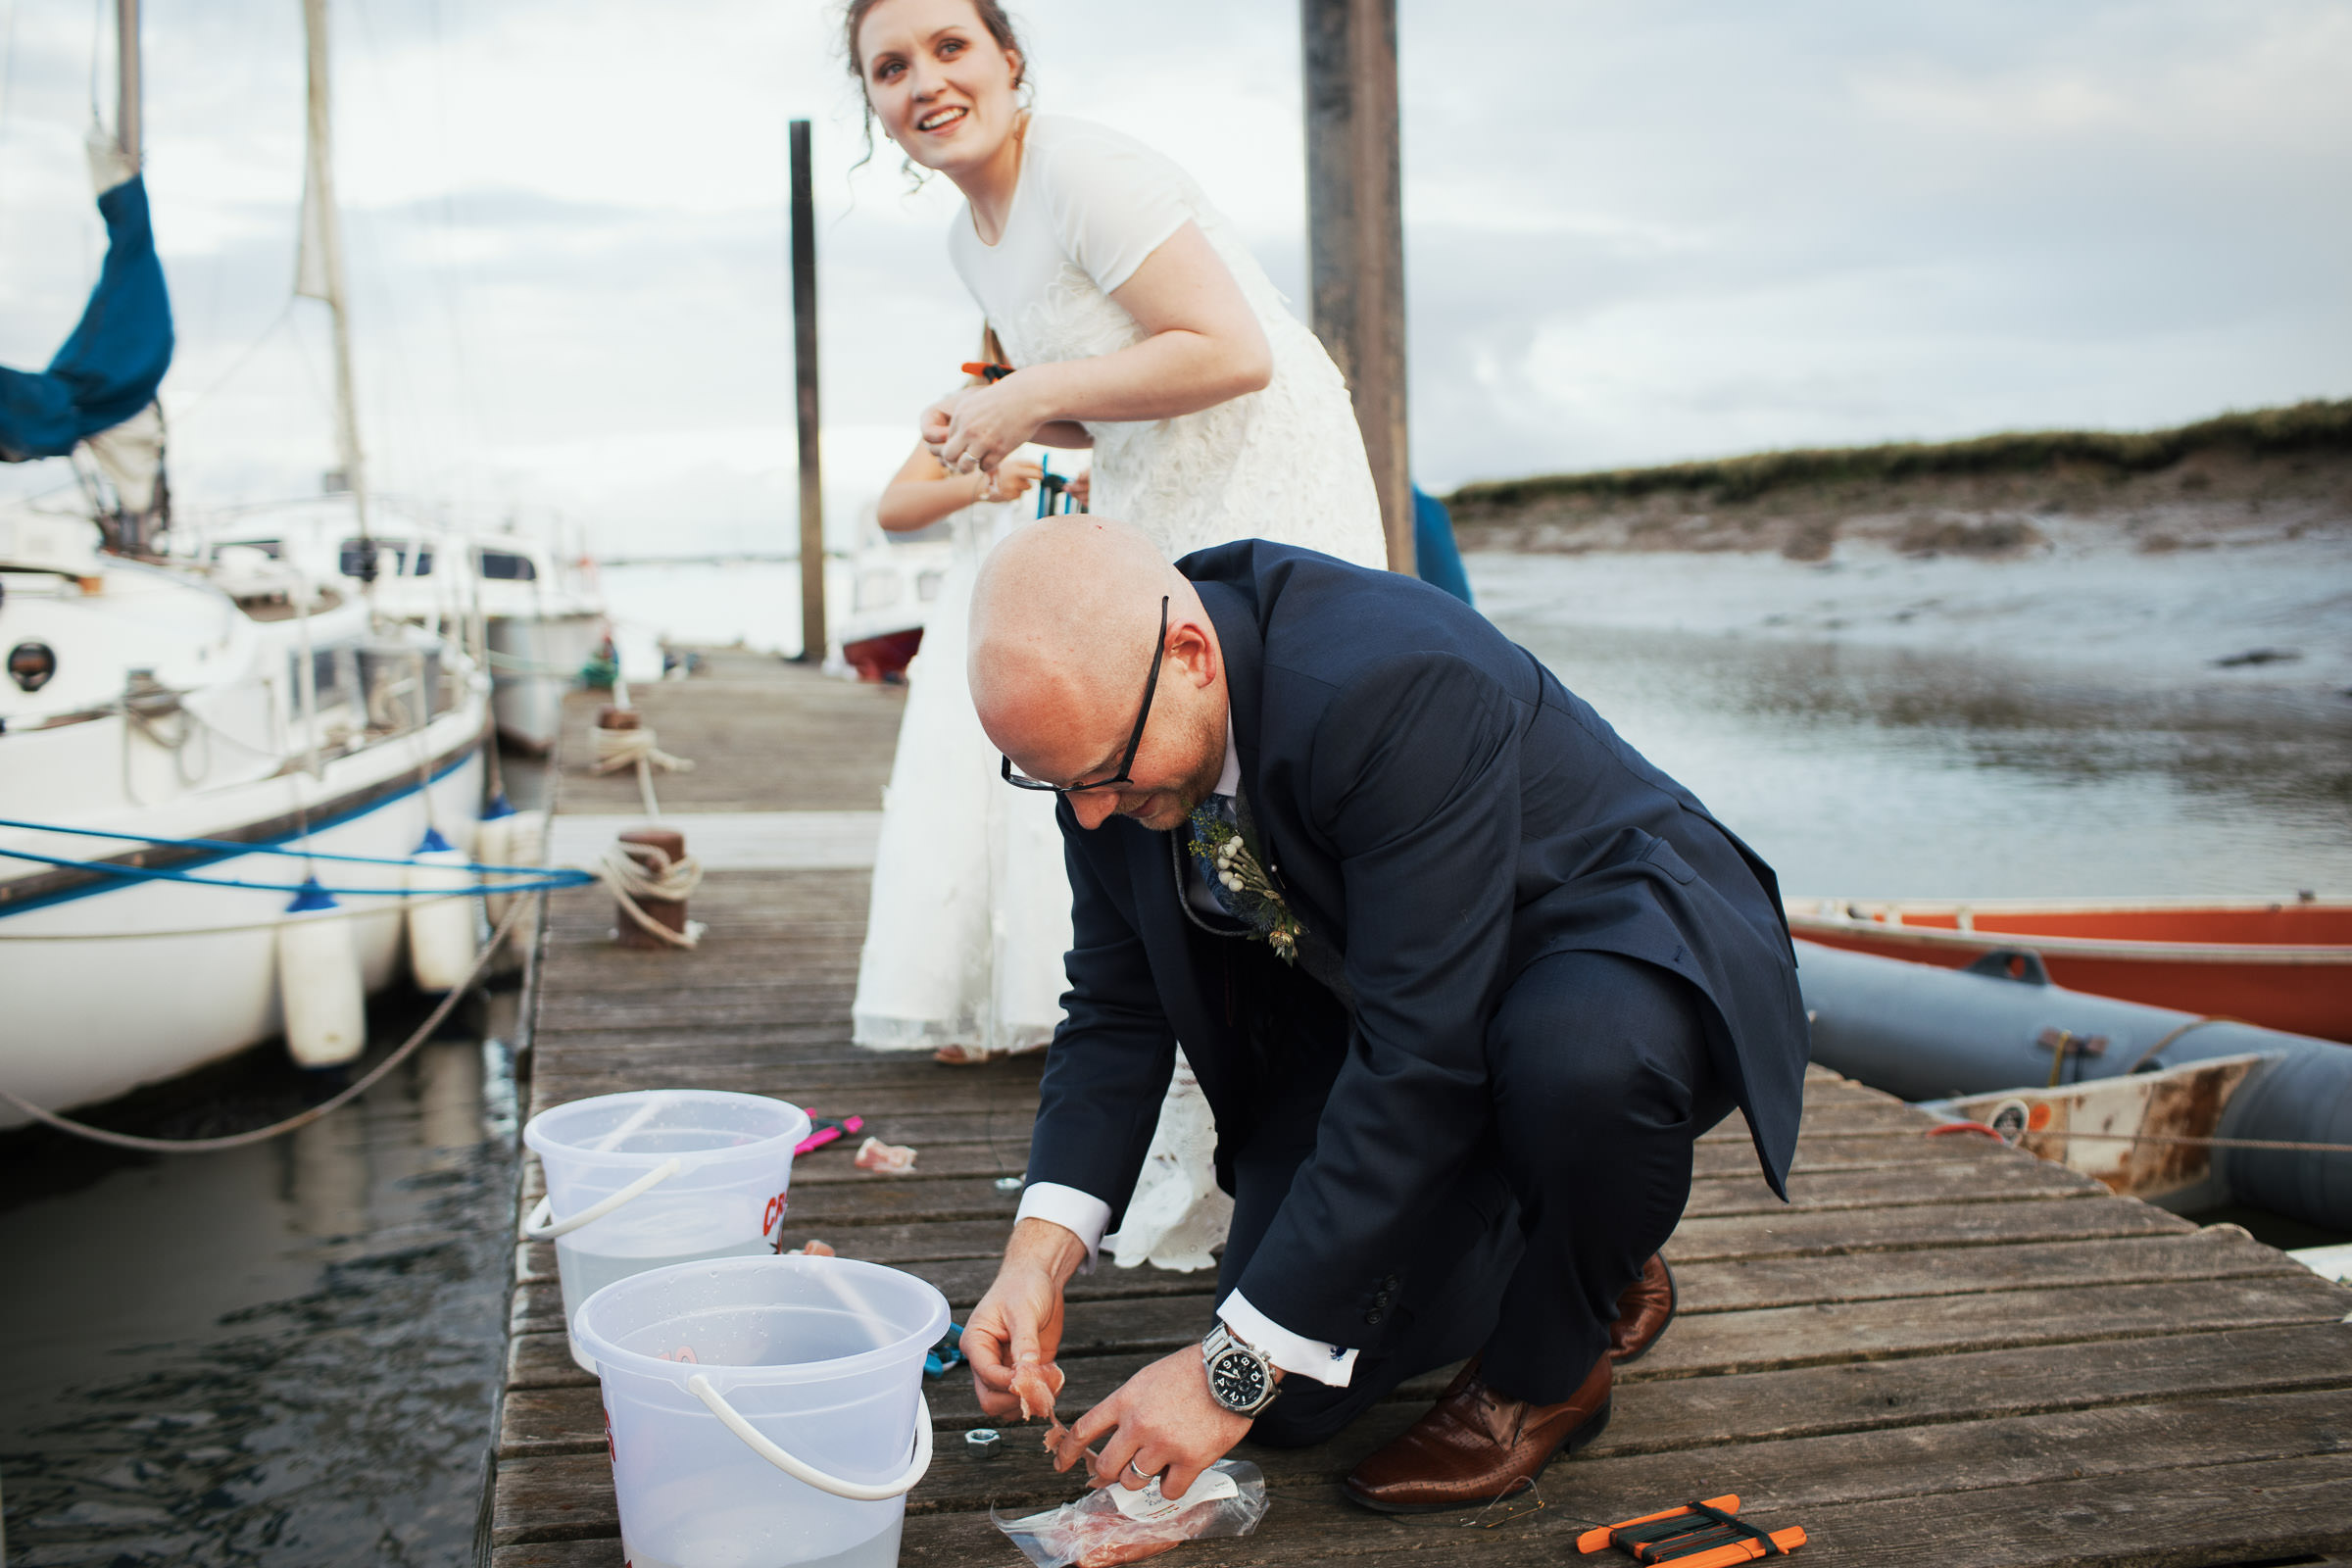 Bride and groom on the jetty crabbing on the River Crouch at wedding venue Brandy Hole Kingsman Point Kingsmans Farm Road, Hullbridge, Hockley SS5 6QB